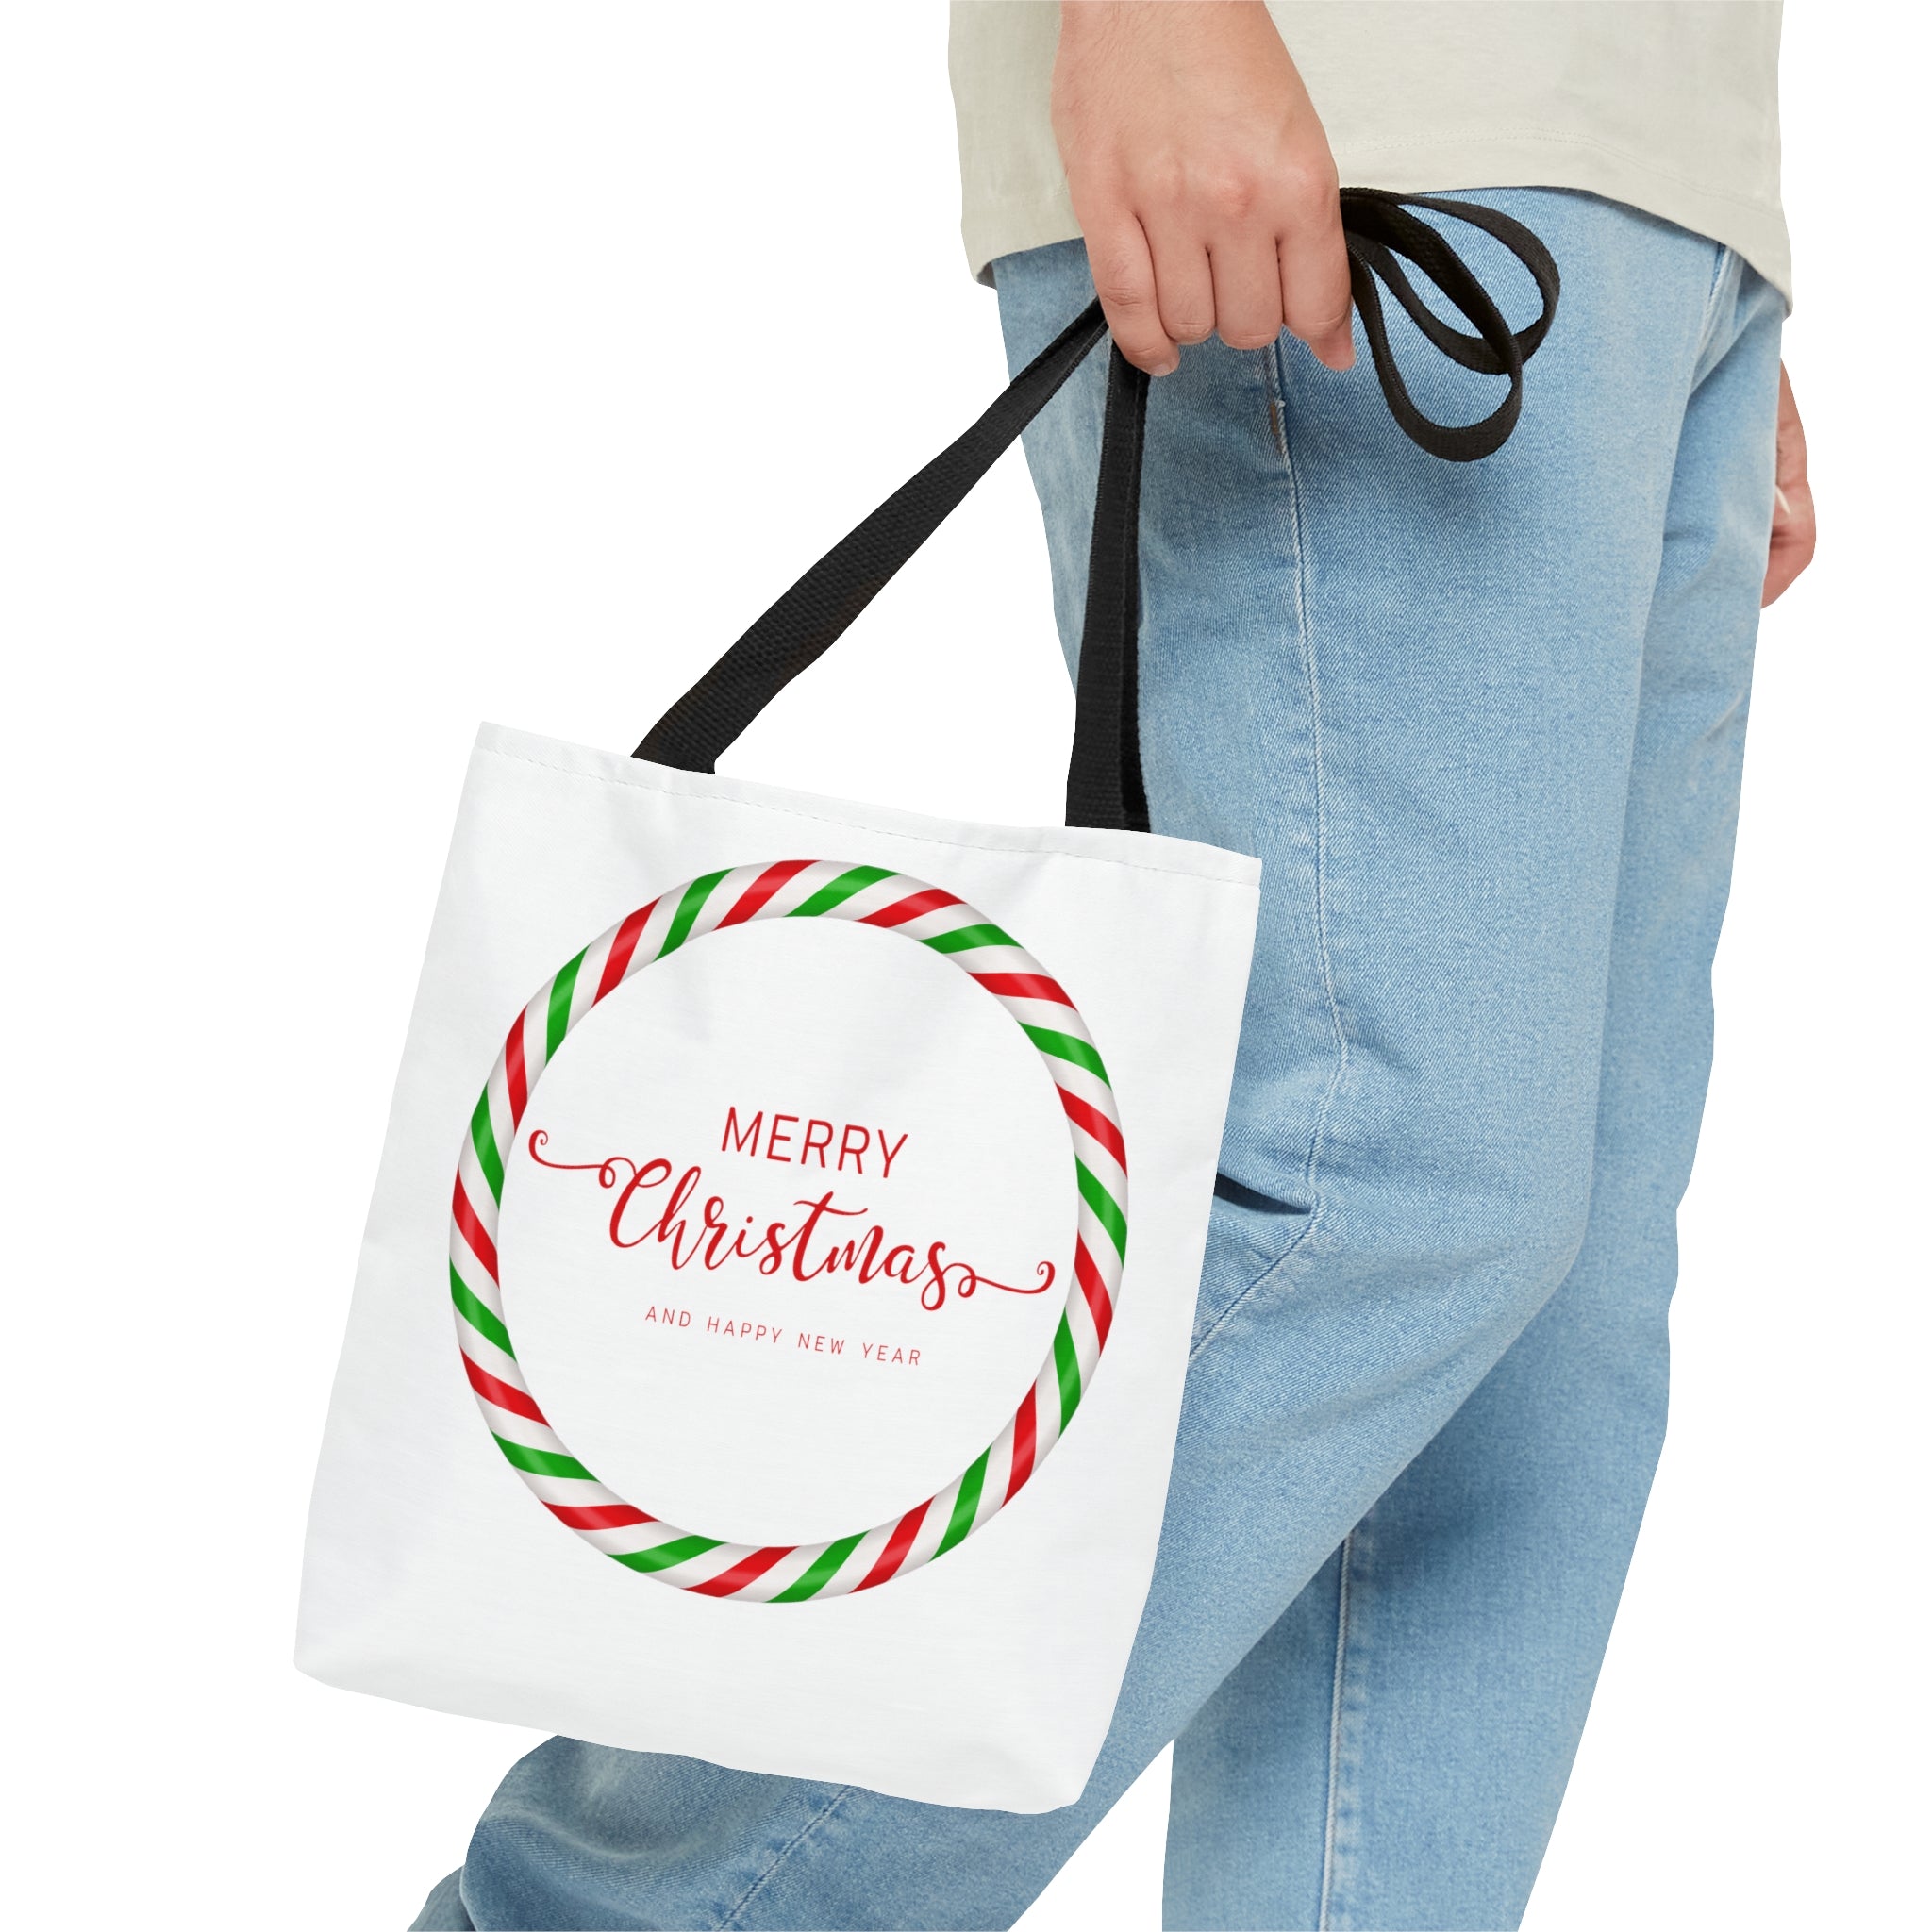 Merry Christmas Tote Bag, Reusable Canvas Tote Bags, Available in Different Size